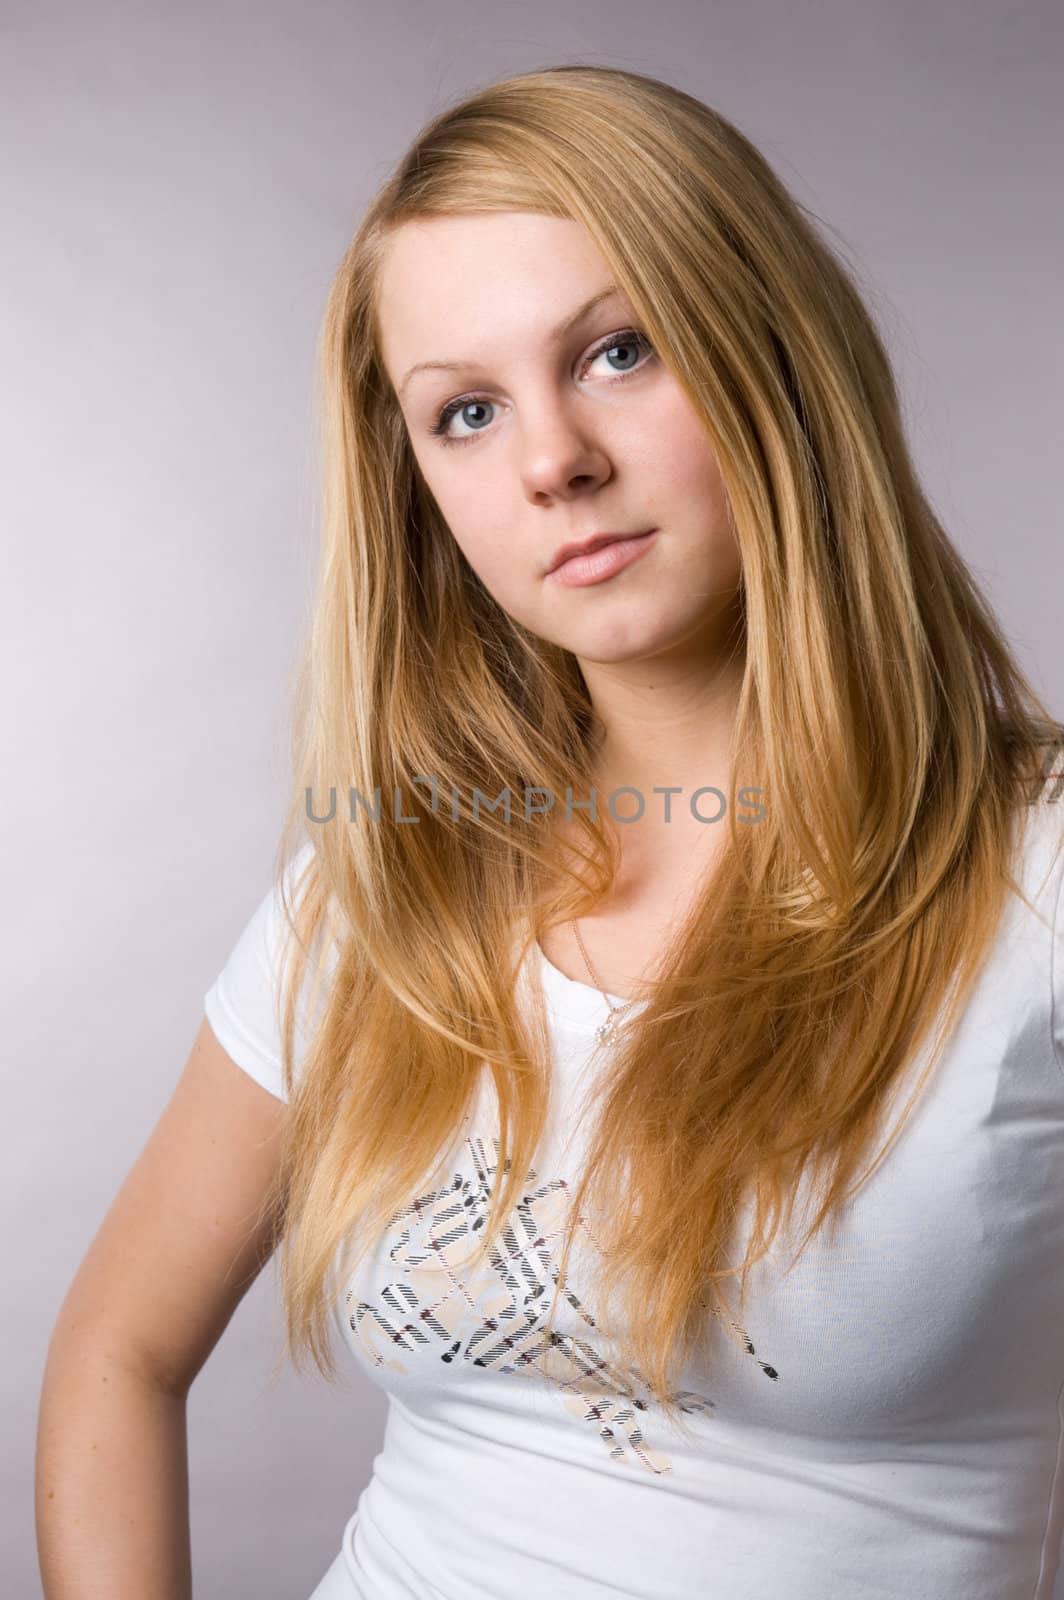 A smiling blonde on a grey background in studio. by andyphoto